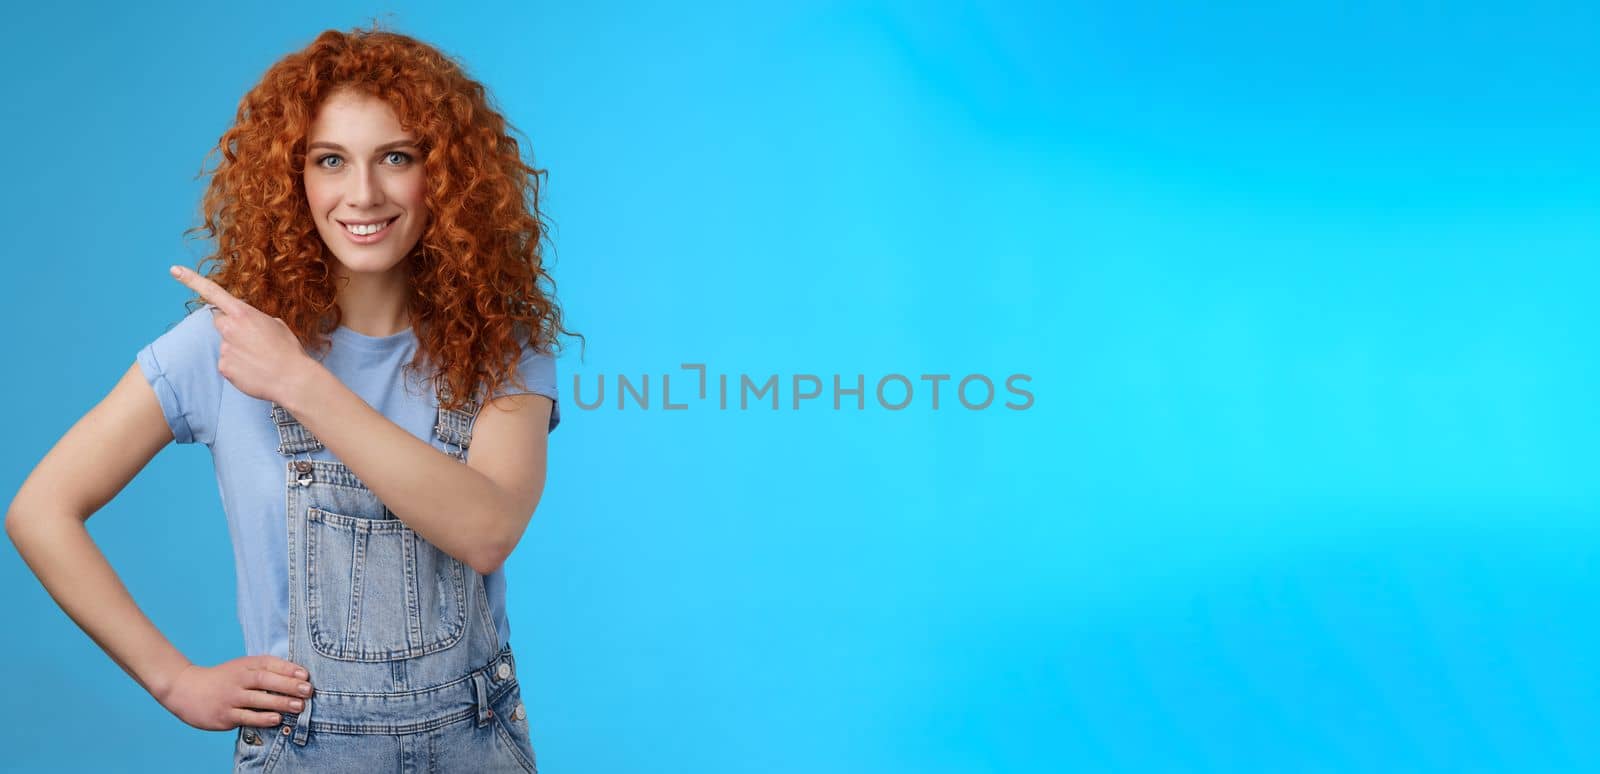 Girl suggest perfect place ad. Sassy good-looking empowered redhead daring woman smiling assertive motivated pointing upper left corner grin toothy confident you like promo blue background.